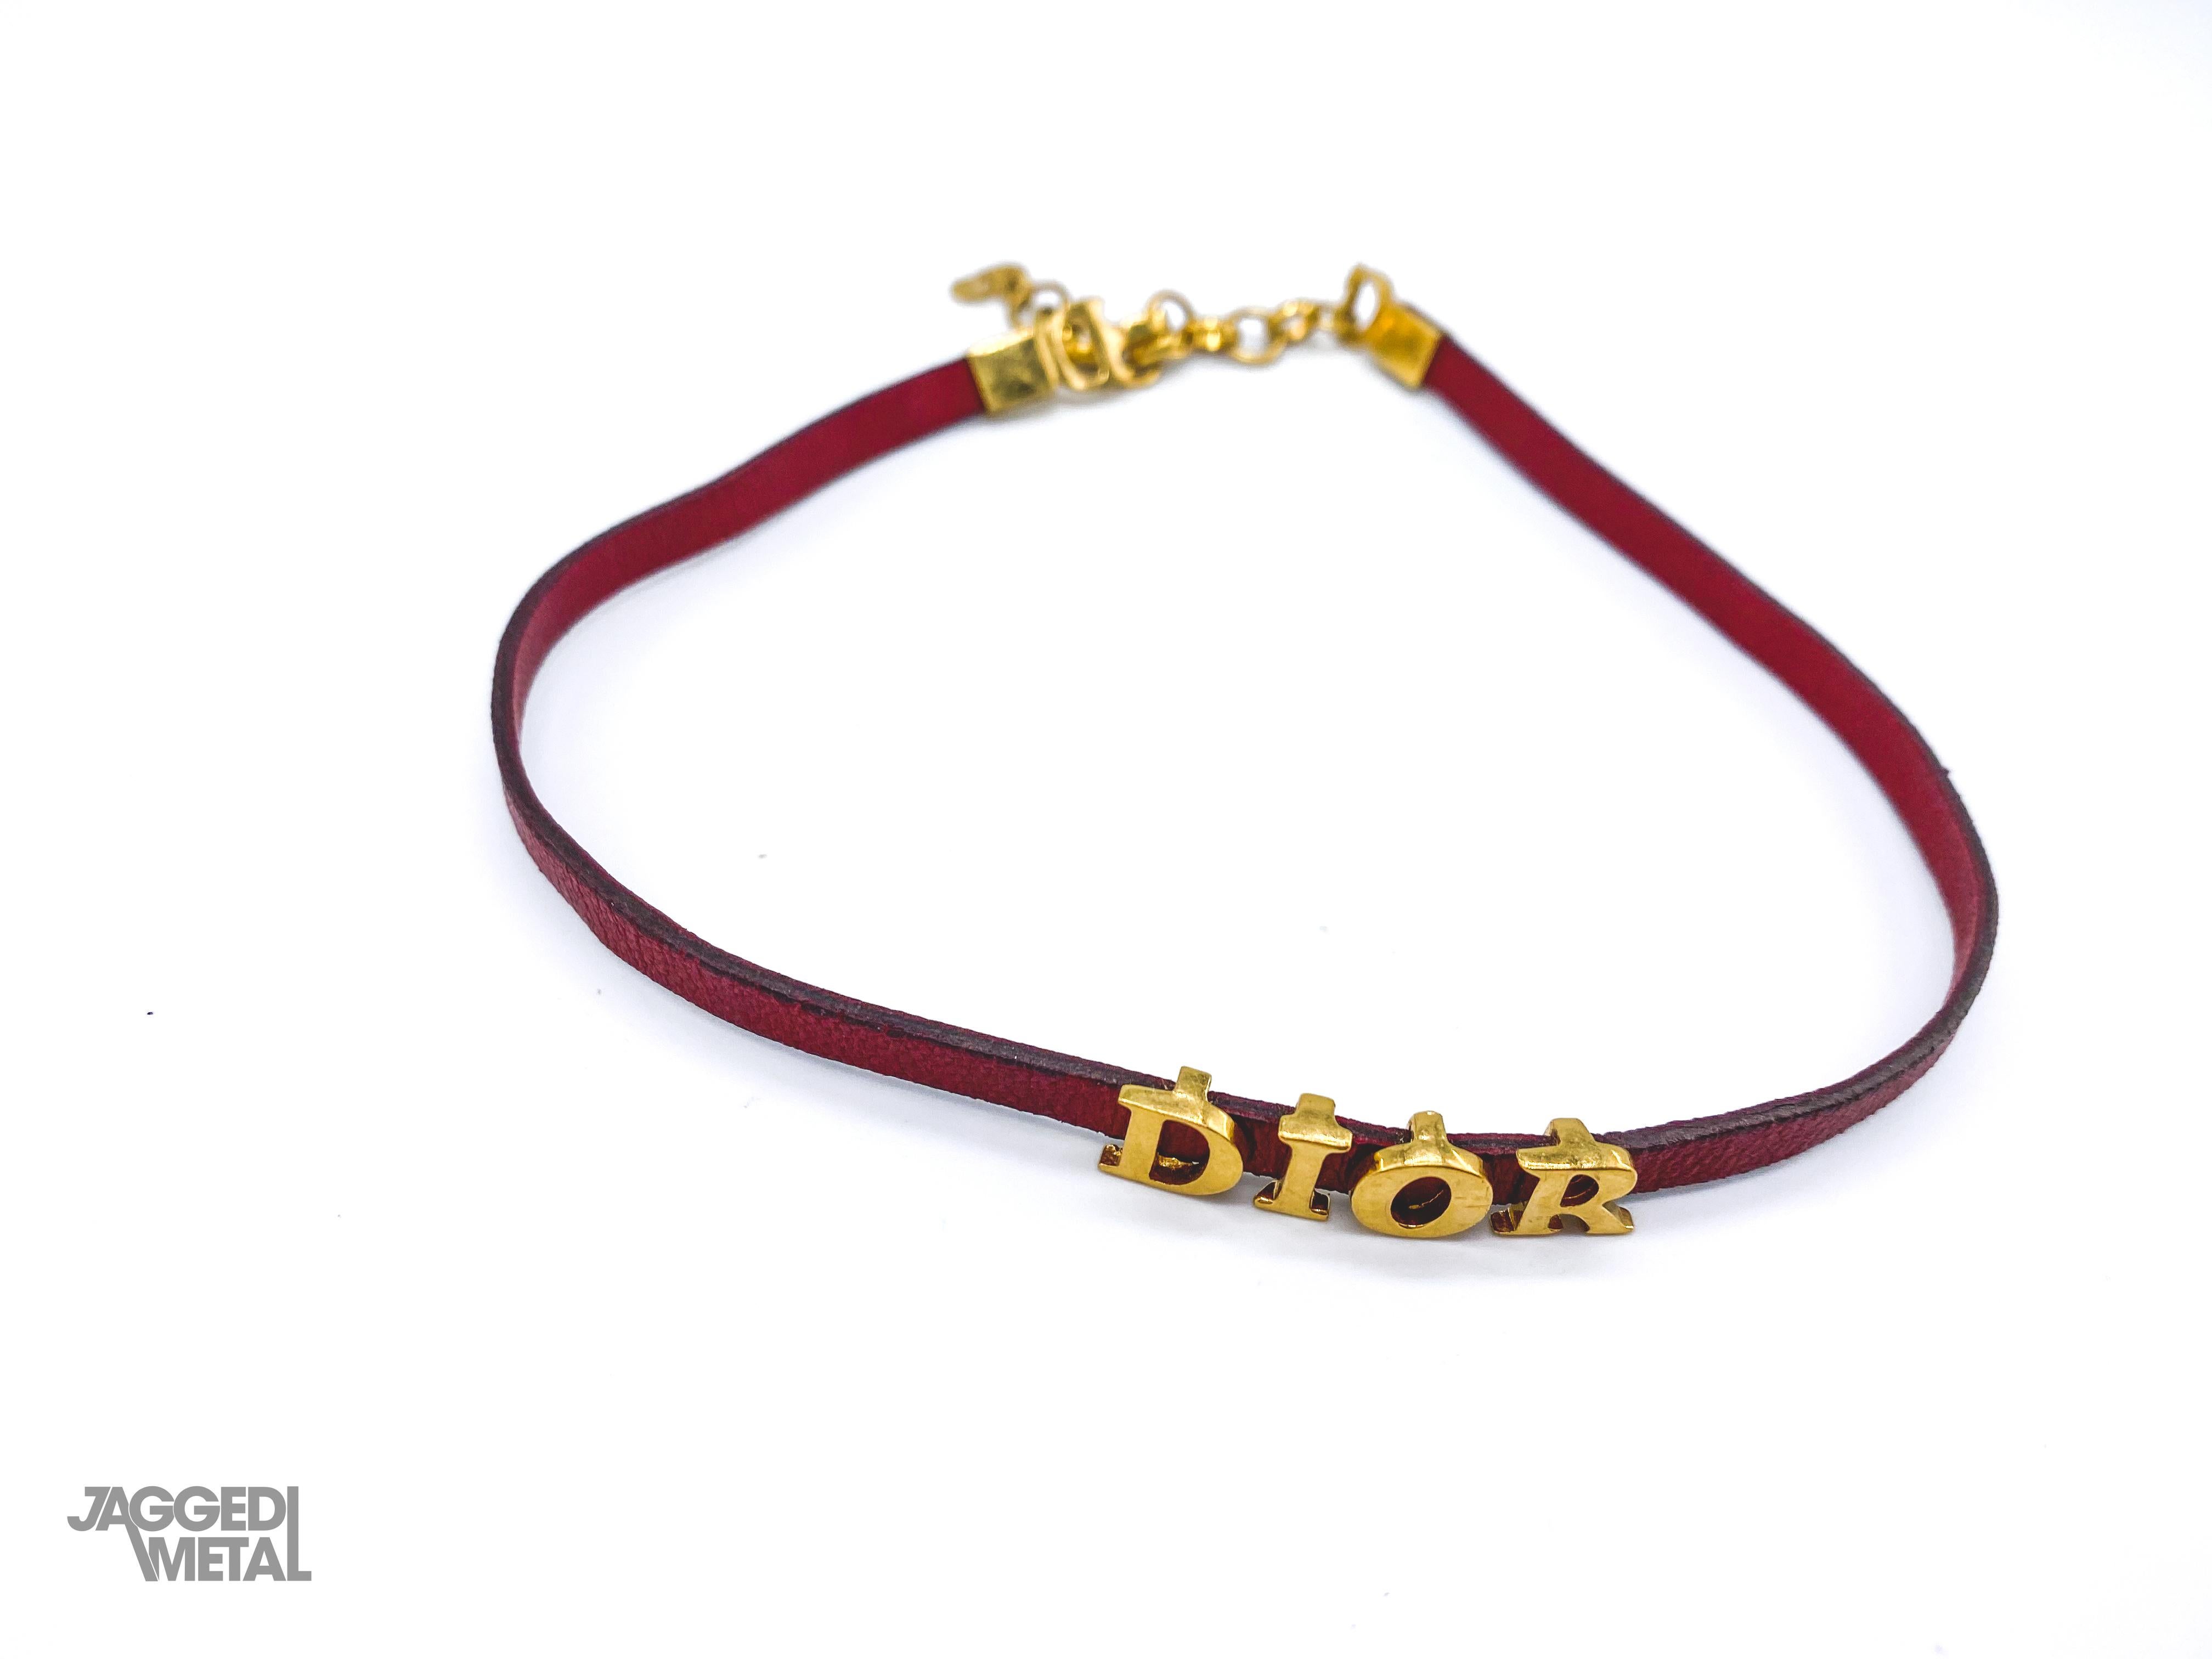 Dior Vintage Leather Choker Necklace

An incredible subtle yet statement piece from the House of Dior, still on of the most coveted designers in the world. A classic 90s inspired piece that feels completely right for now

Detail
-Deep red leather